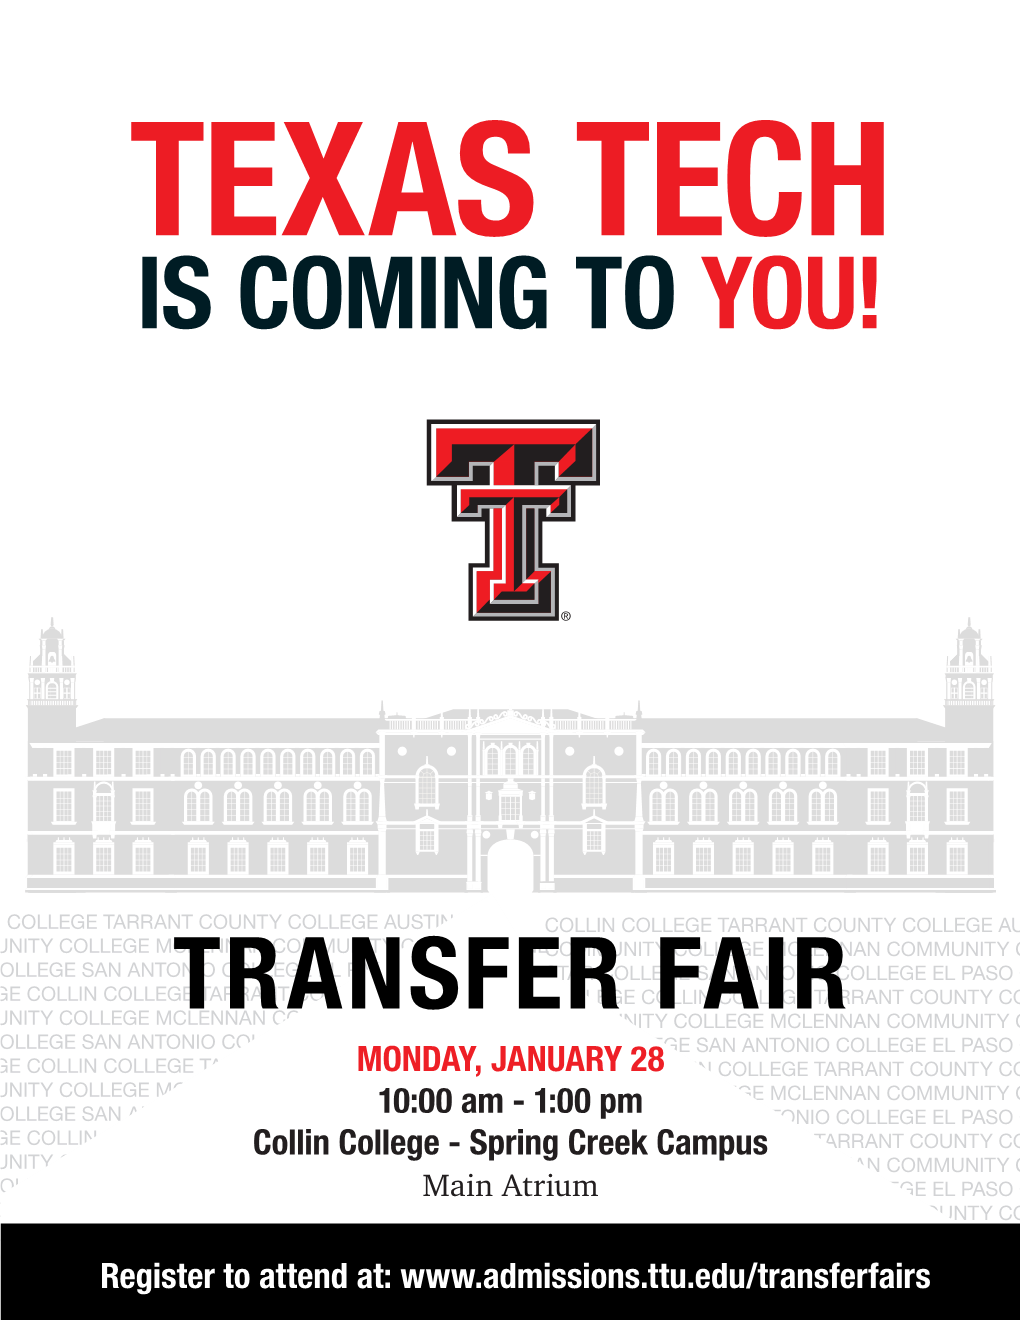 Transfer Fair Is Coming to You!